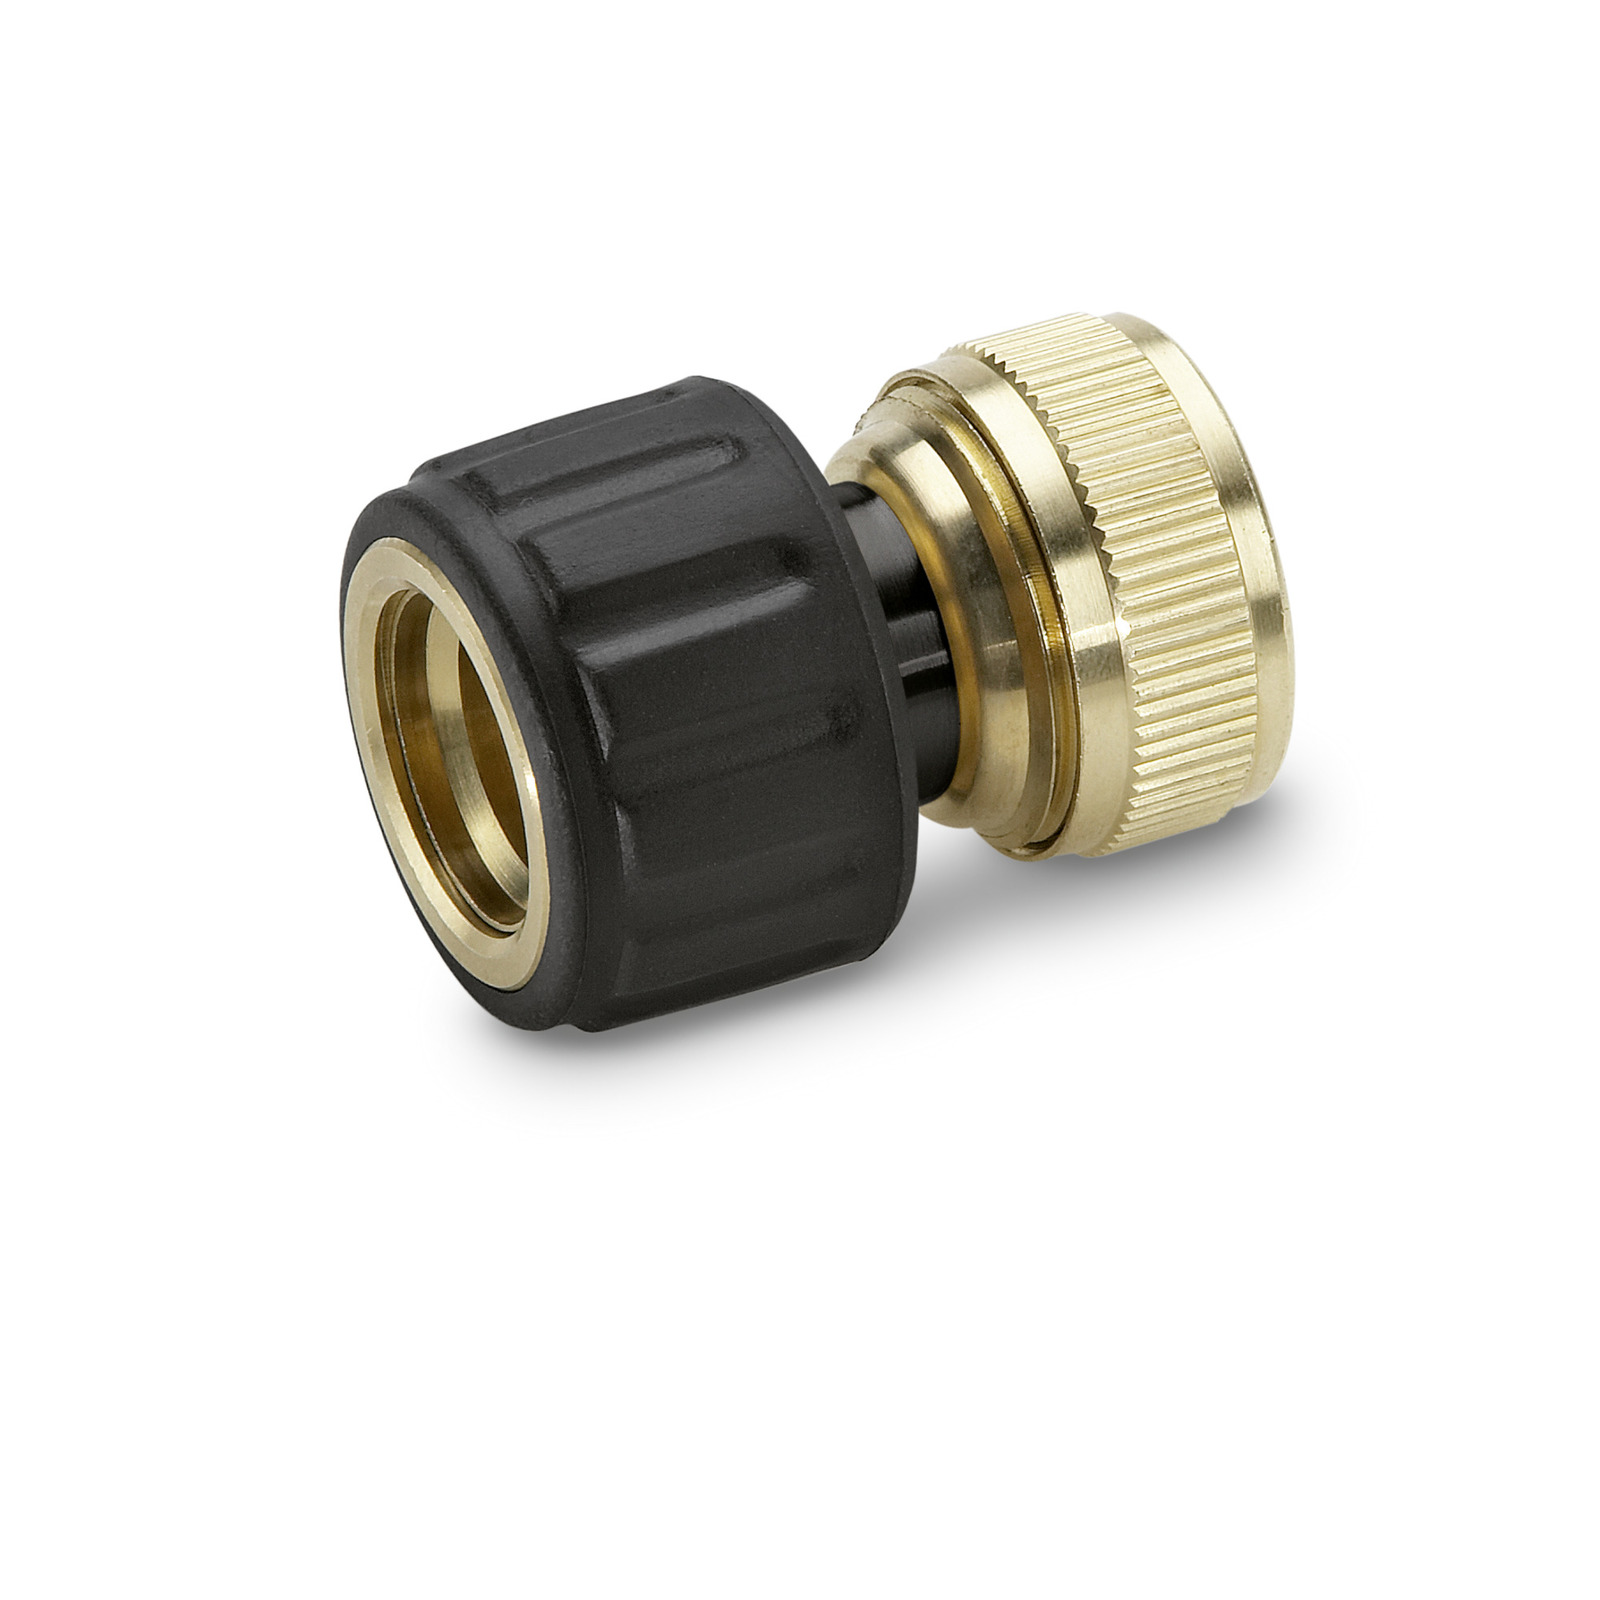 Brass Hose Connection 1 2 And 5 8 With Aqua Stop Karcher Nz